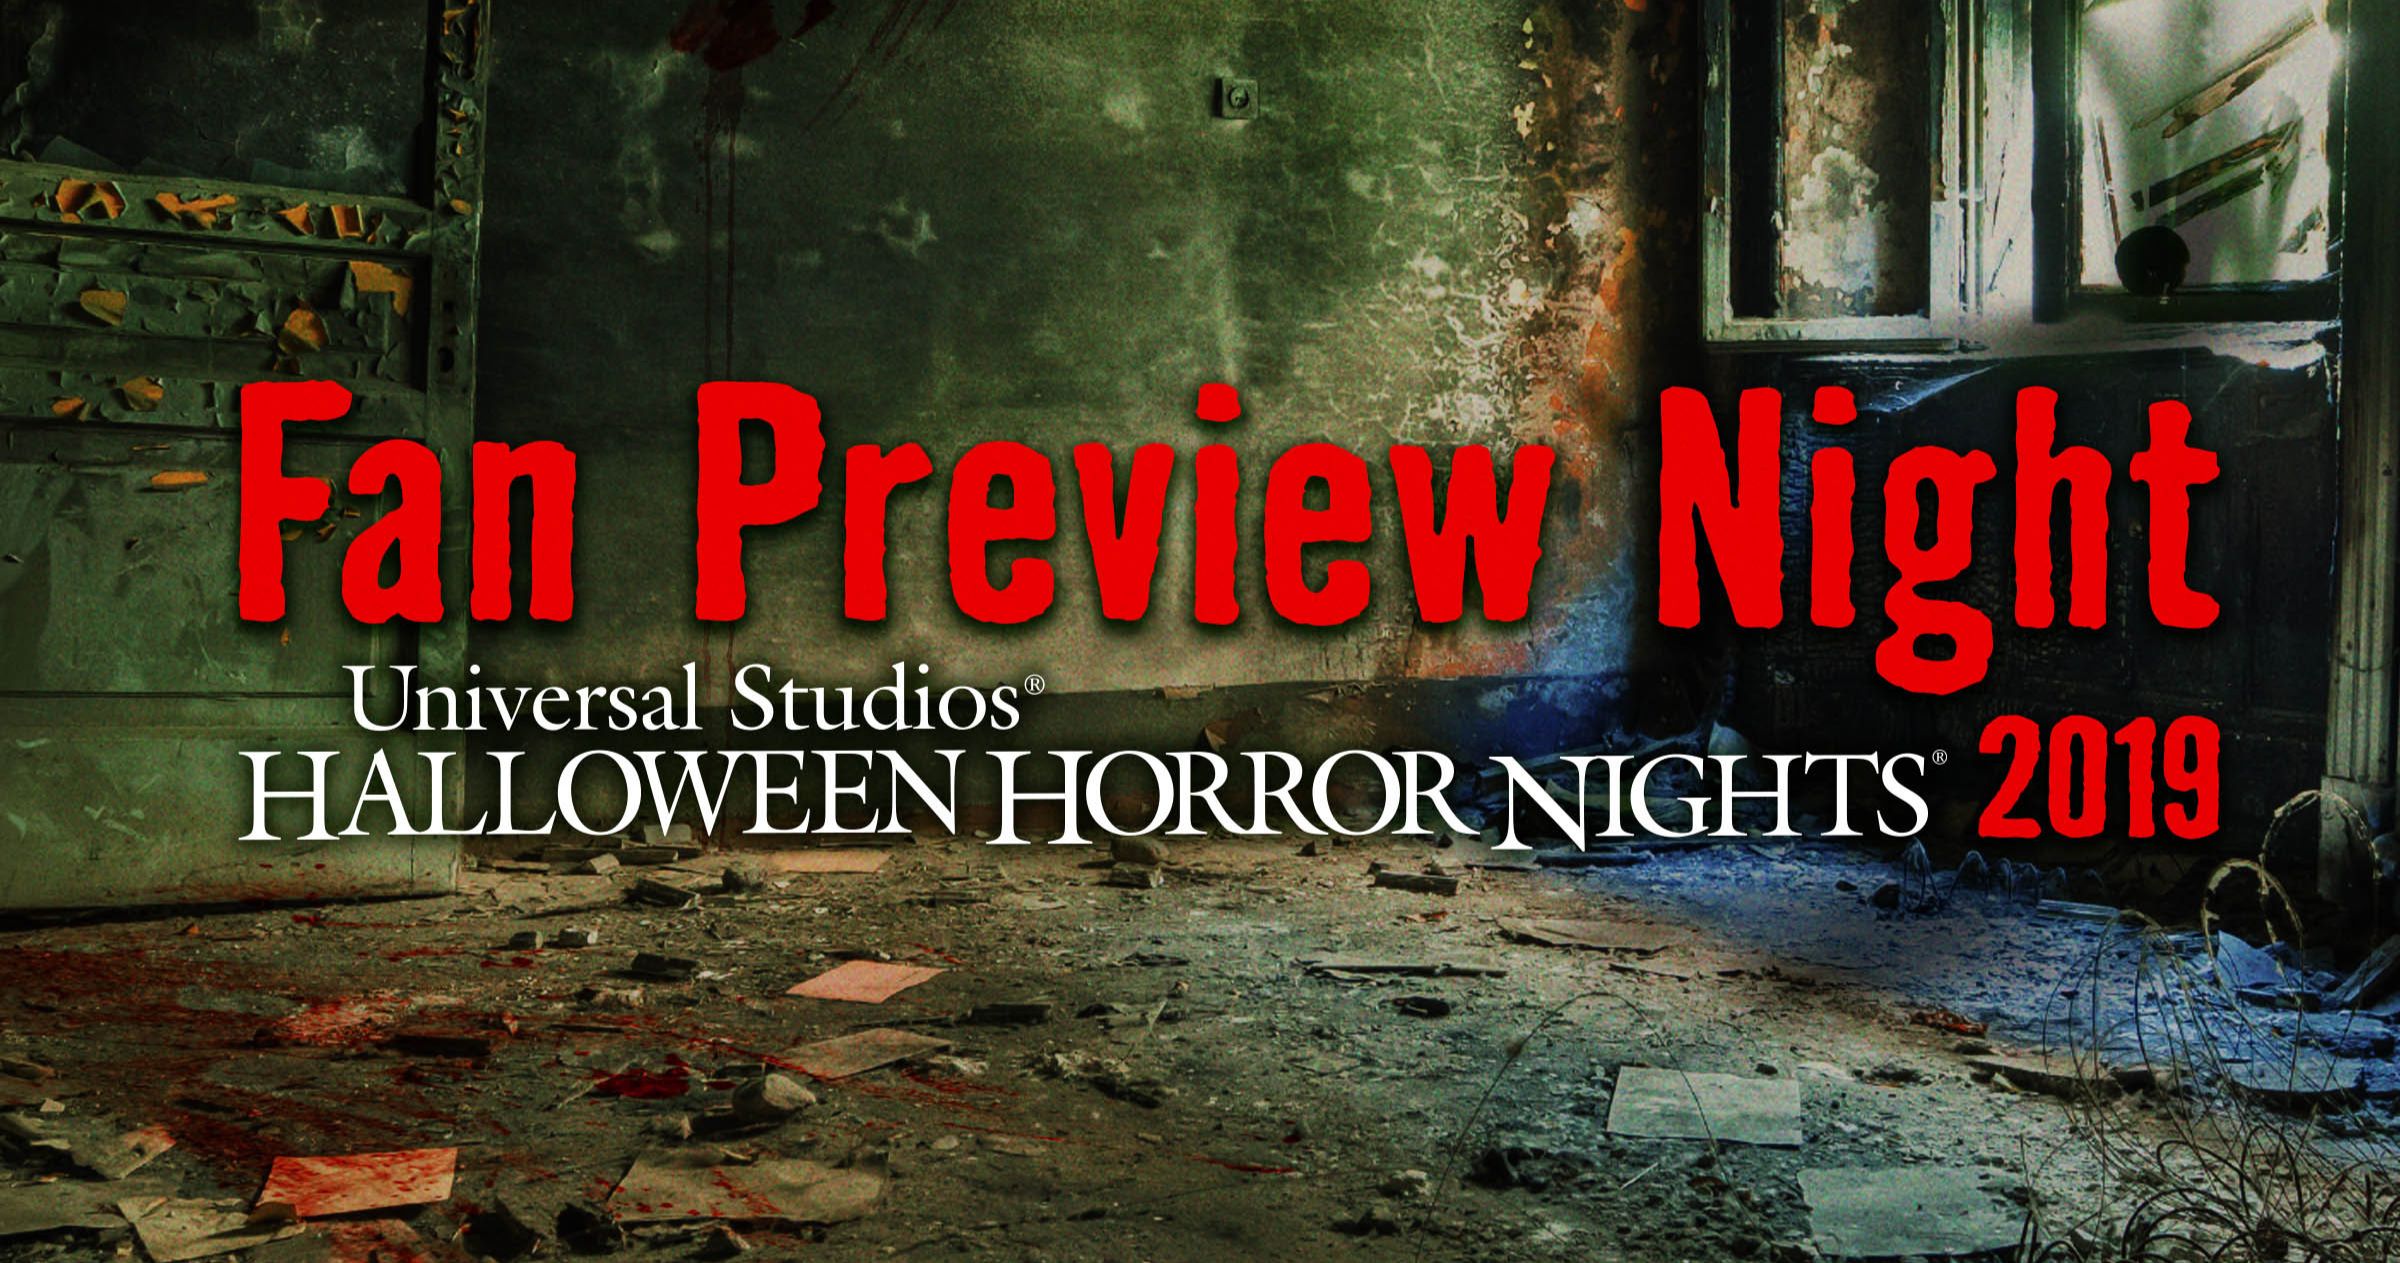 Halloween Horror Nights Hollywood Gives Fans a Sneak Preview on September 12